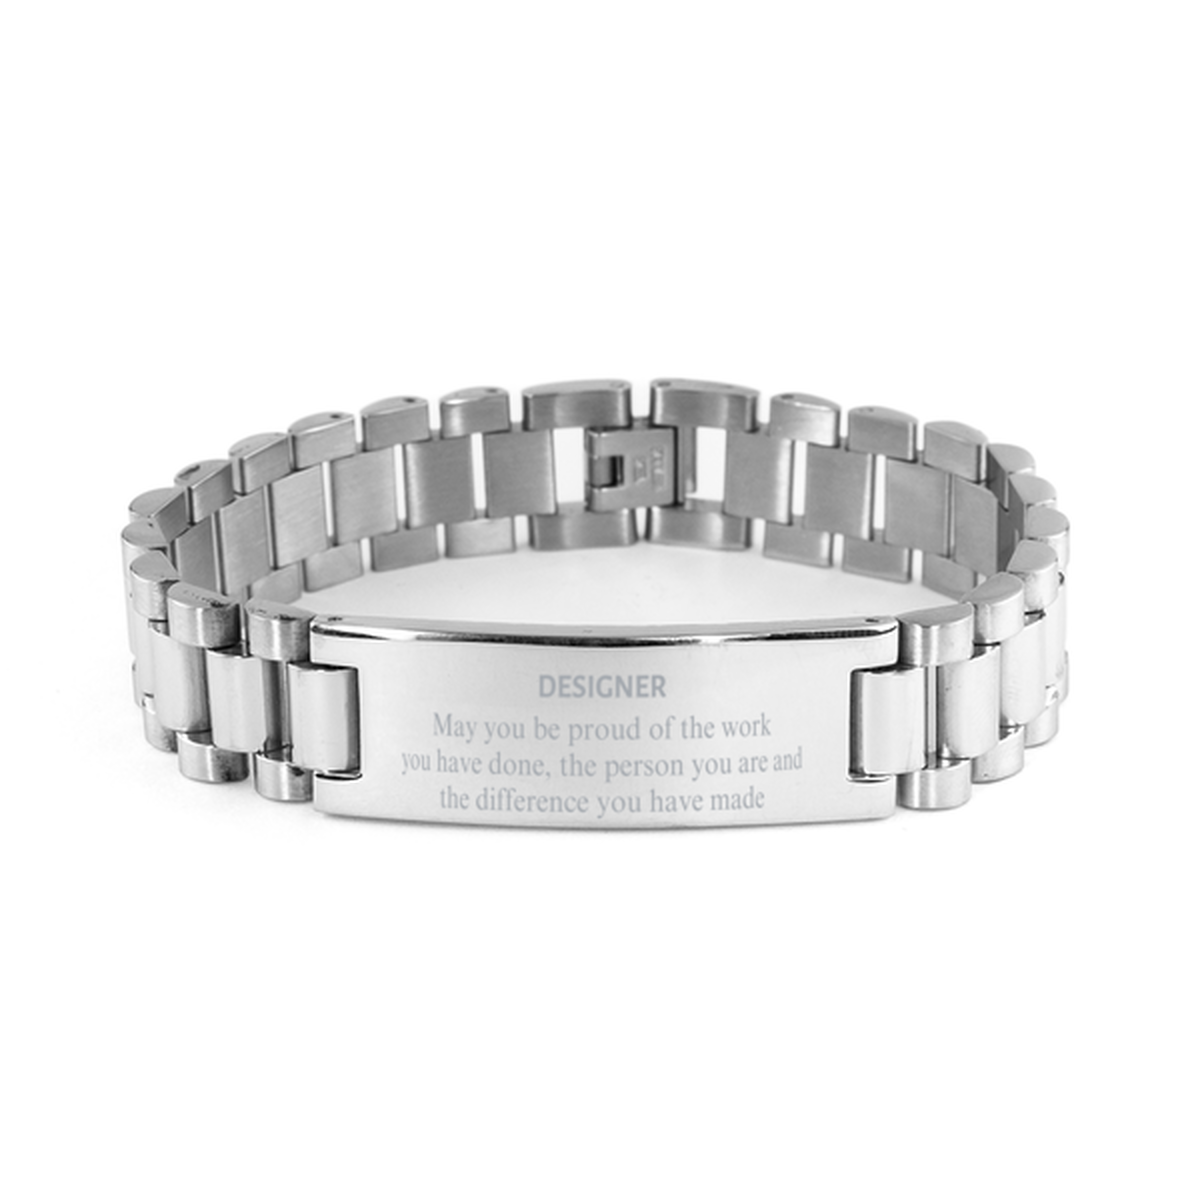 Designer May you be proud of the work you have done, Retirement Designer Ladder Stainless Steel Bracelet for Colleague Appreciation Gifts Amazing for Designer